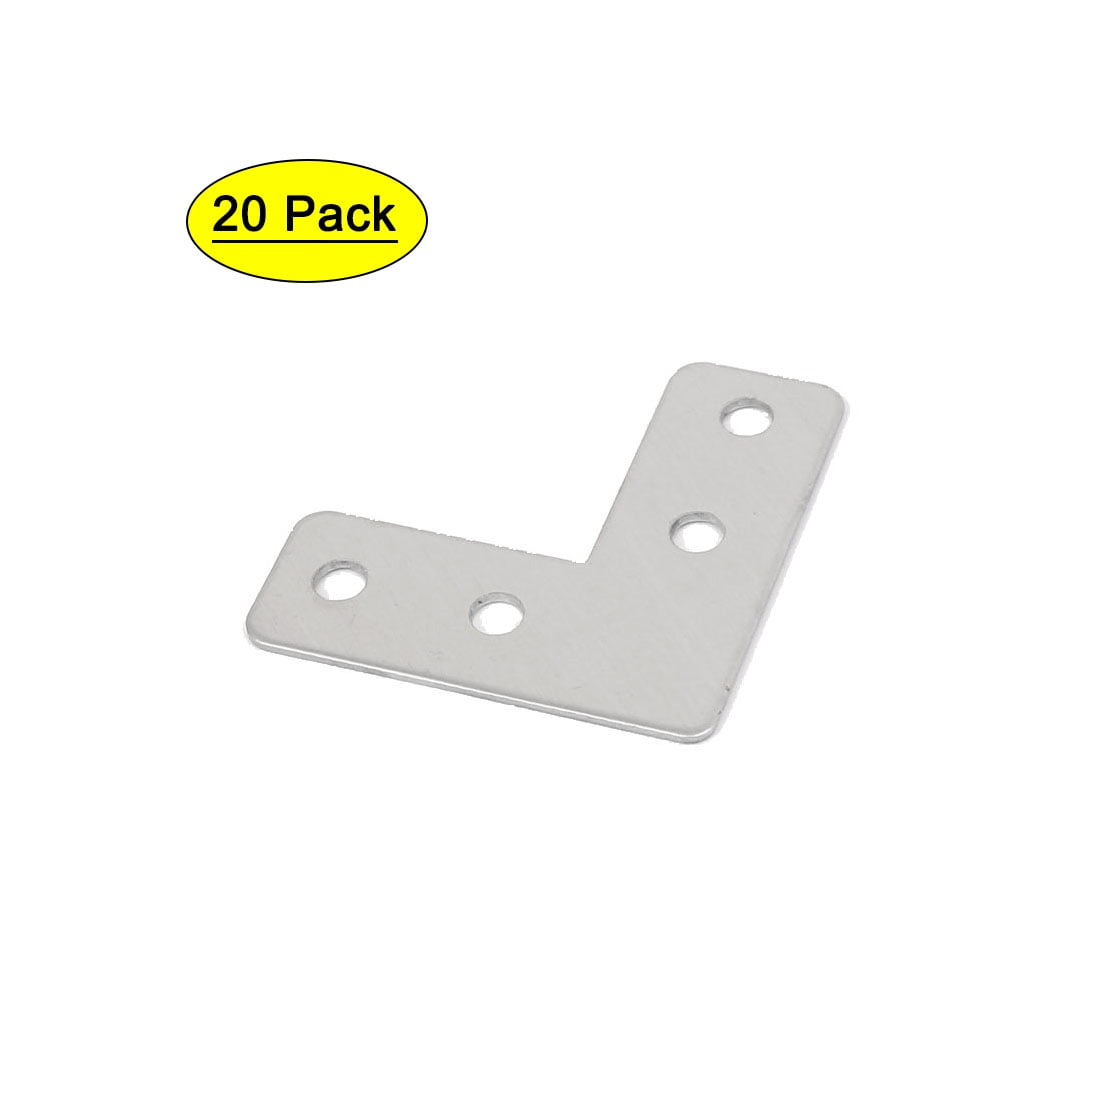 uxcell 40mmx 40mm Stainless Steel Corner Plate Mending Plate Straight Corner Brace Brackets Connector Furniture Repair Fixing Joint 